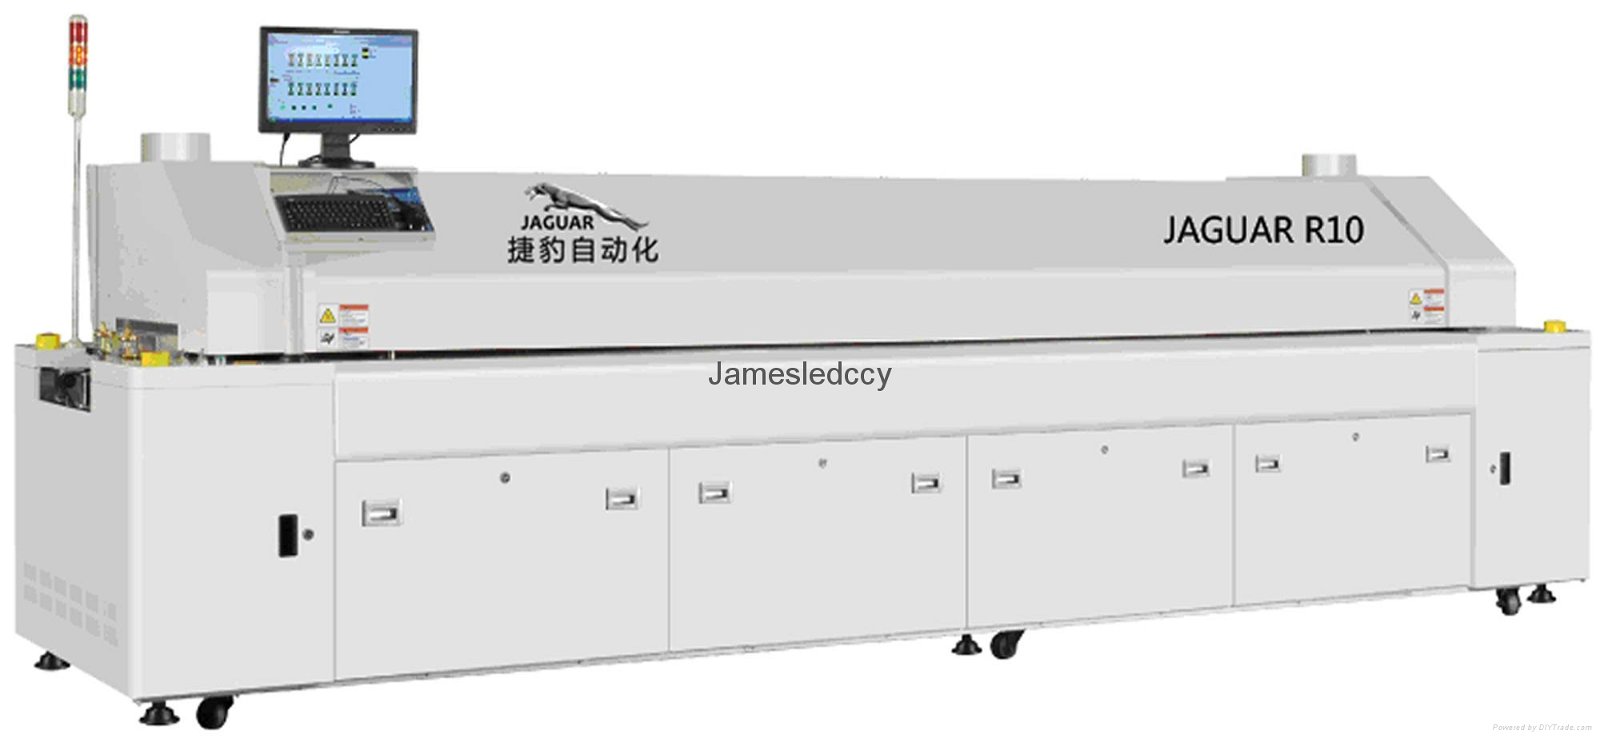 R8 Hot Air Lead-free Reflow Oven